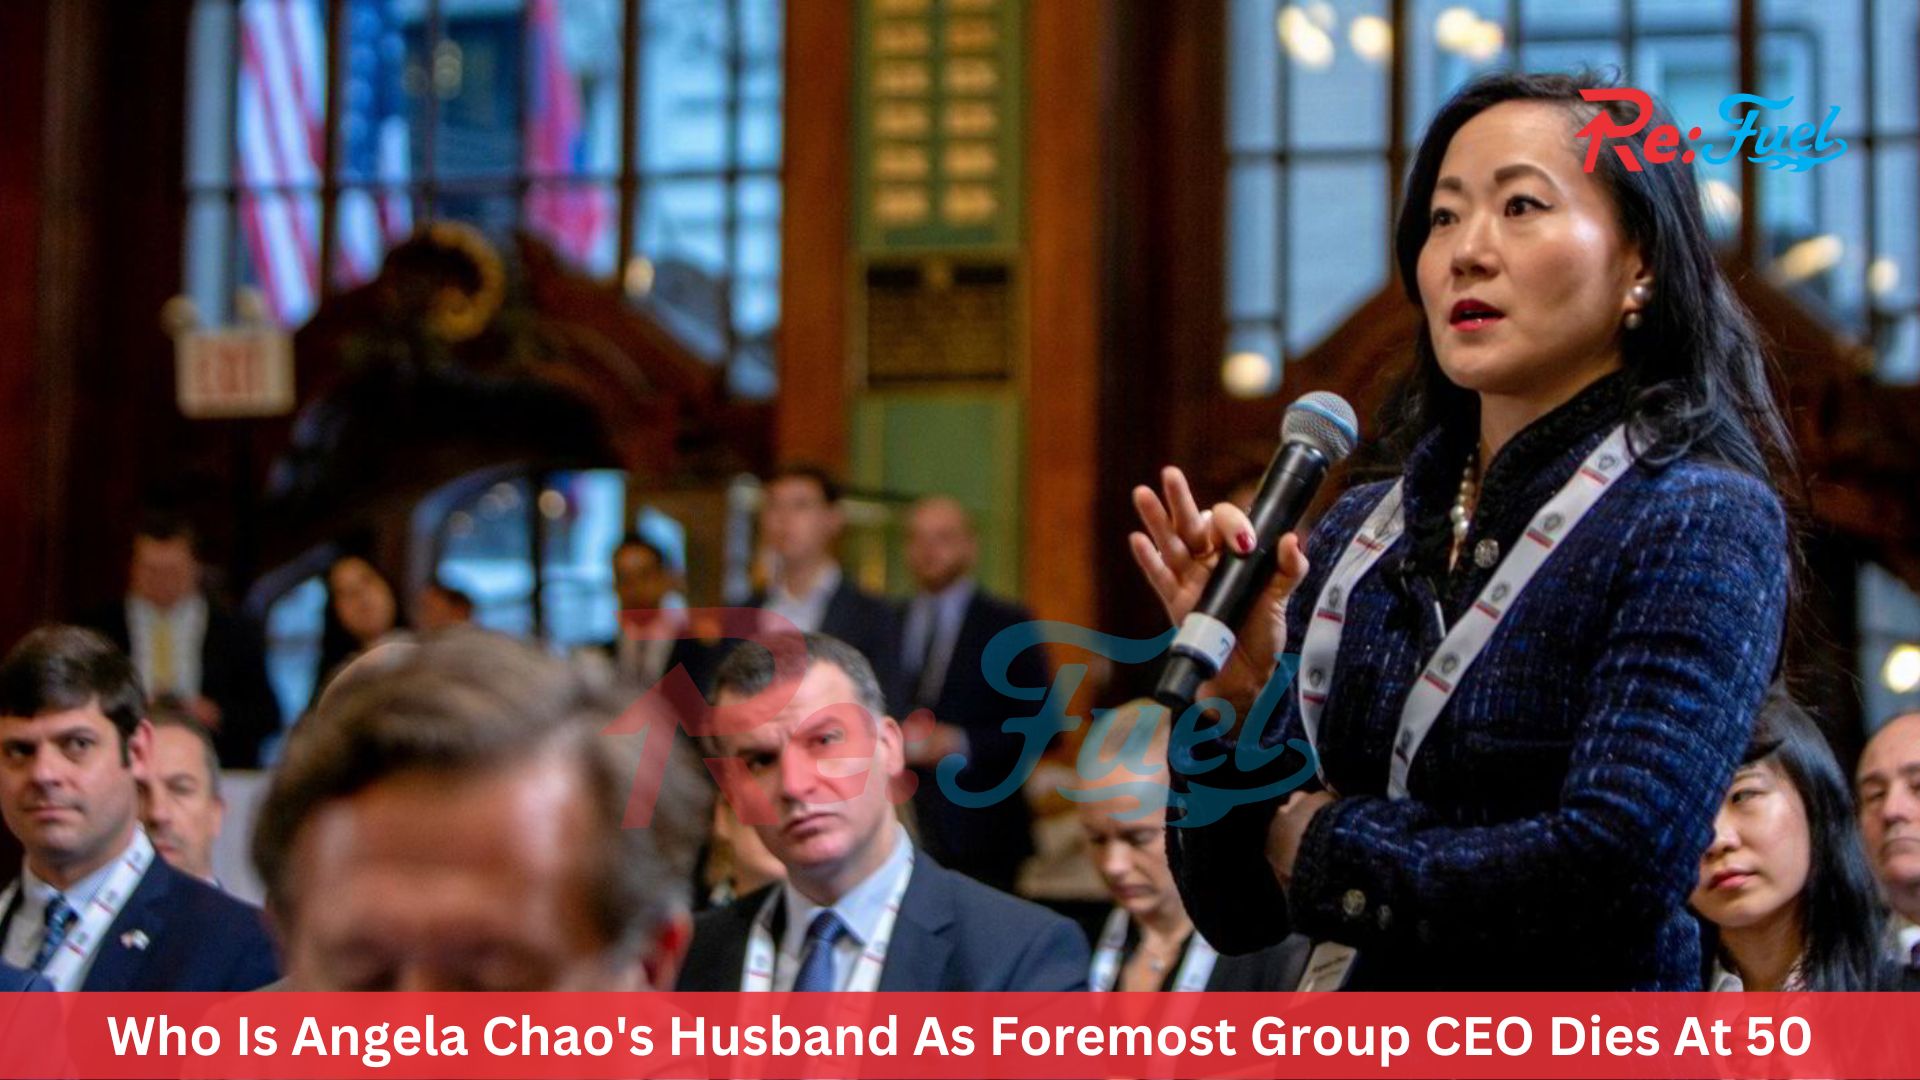 Who Is Angela Chao's Husband As Foremost Group CEO Dies At 50